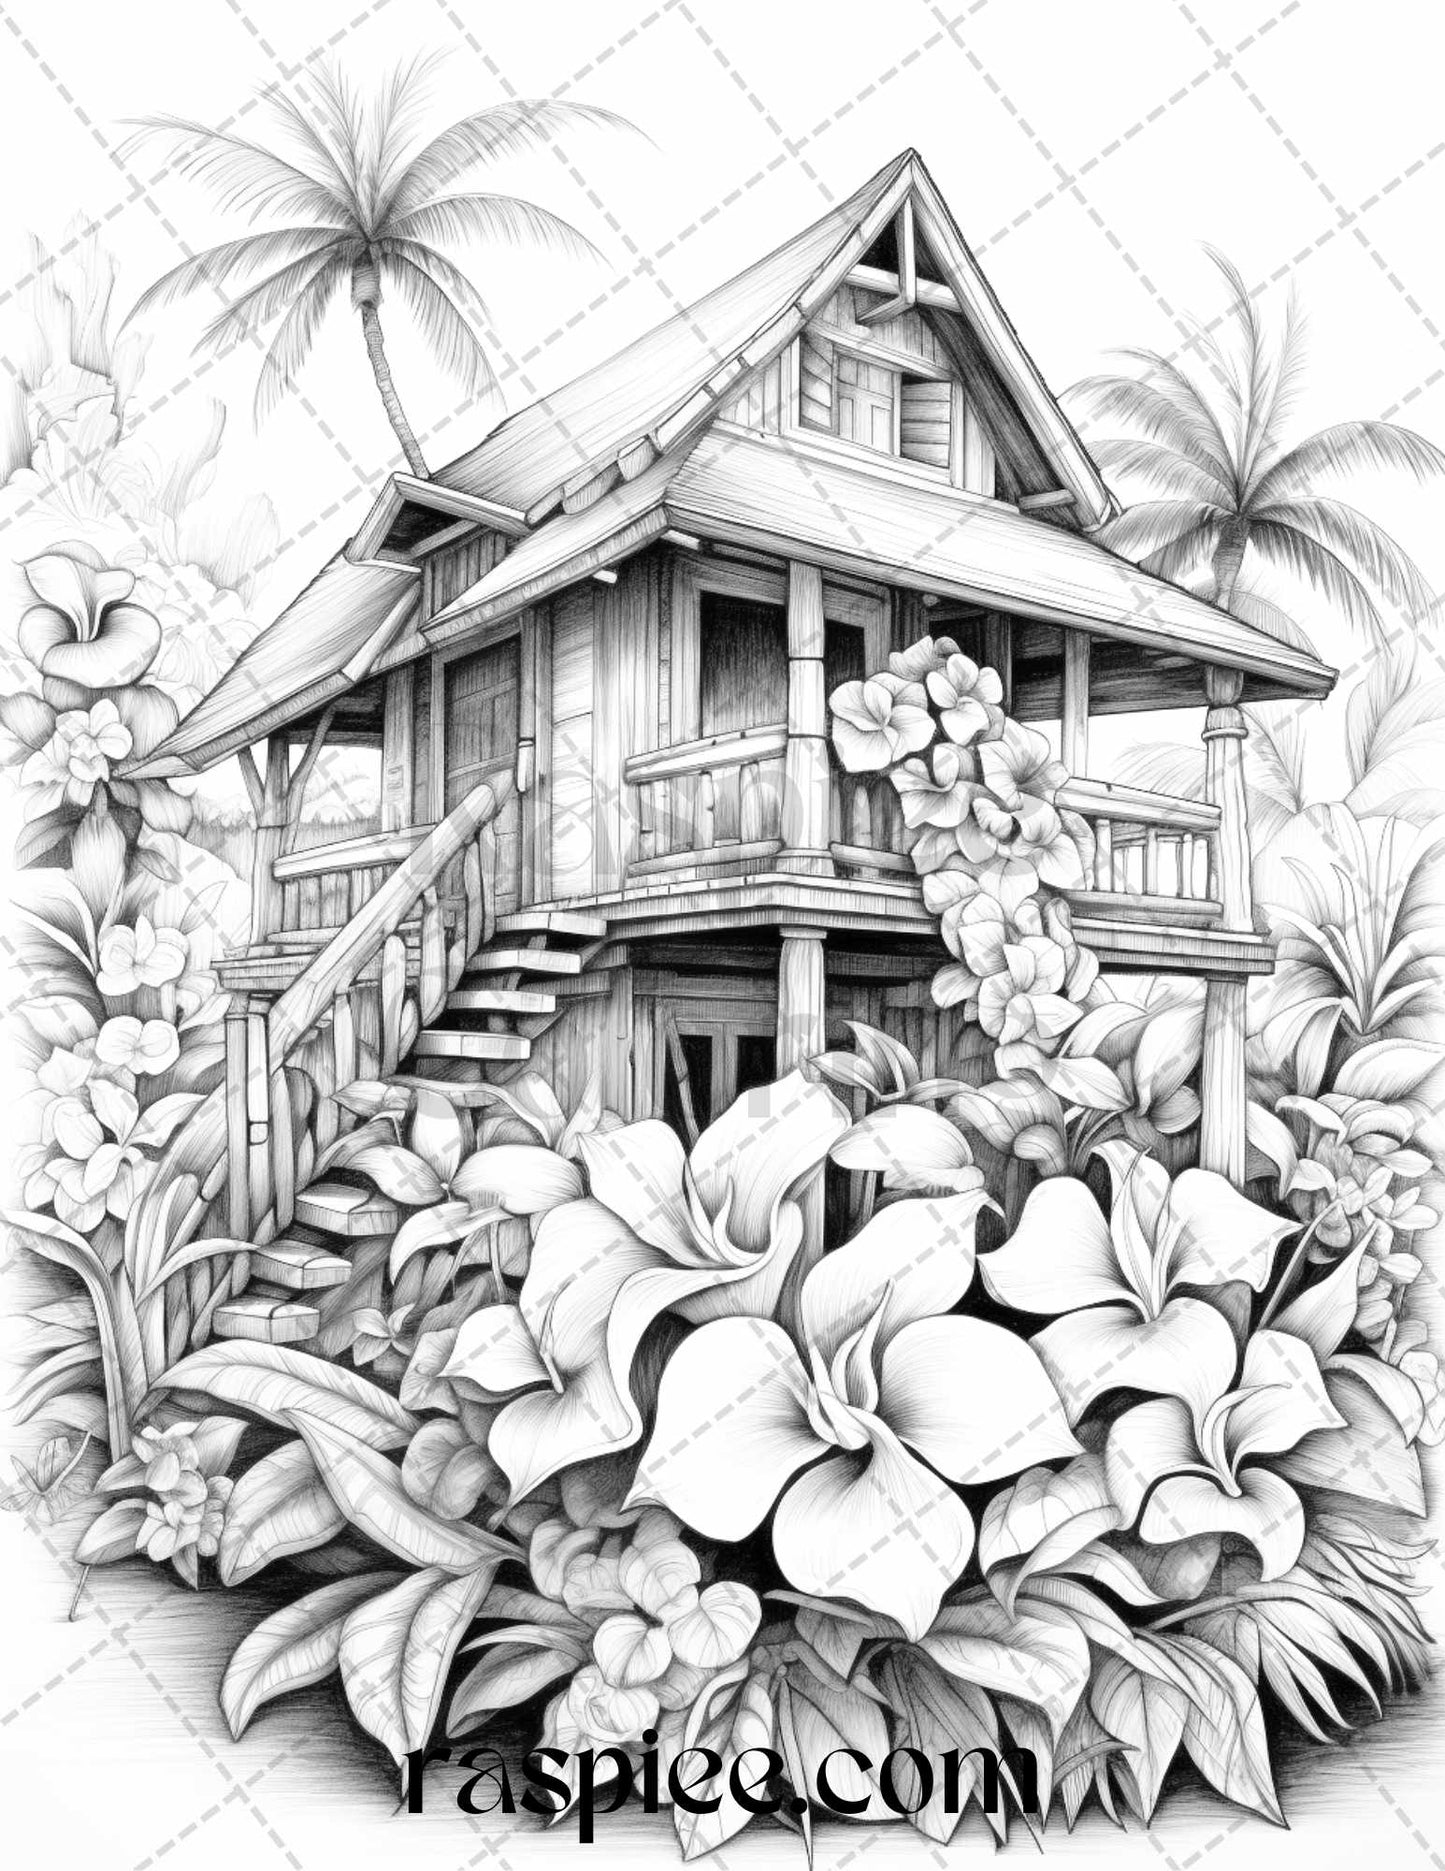 Hawaii Tiki Houses Coloring Pages, Grayscale Adult Coloring Sheets, Relaxation Coloring Pages, Stress Relief Coloring, Vacation Coloring Printables, Tropical Getaway Color Book, Summer Coloring Pages for Adults, Creative DIY Wall Art, Art Therapy Pages